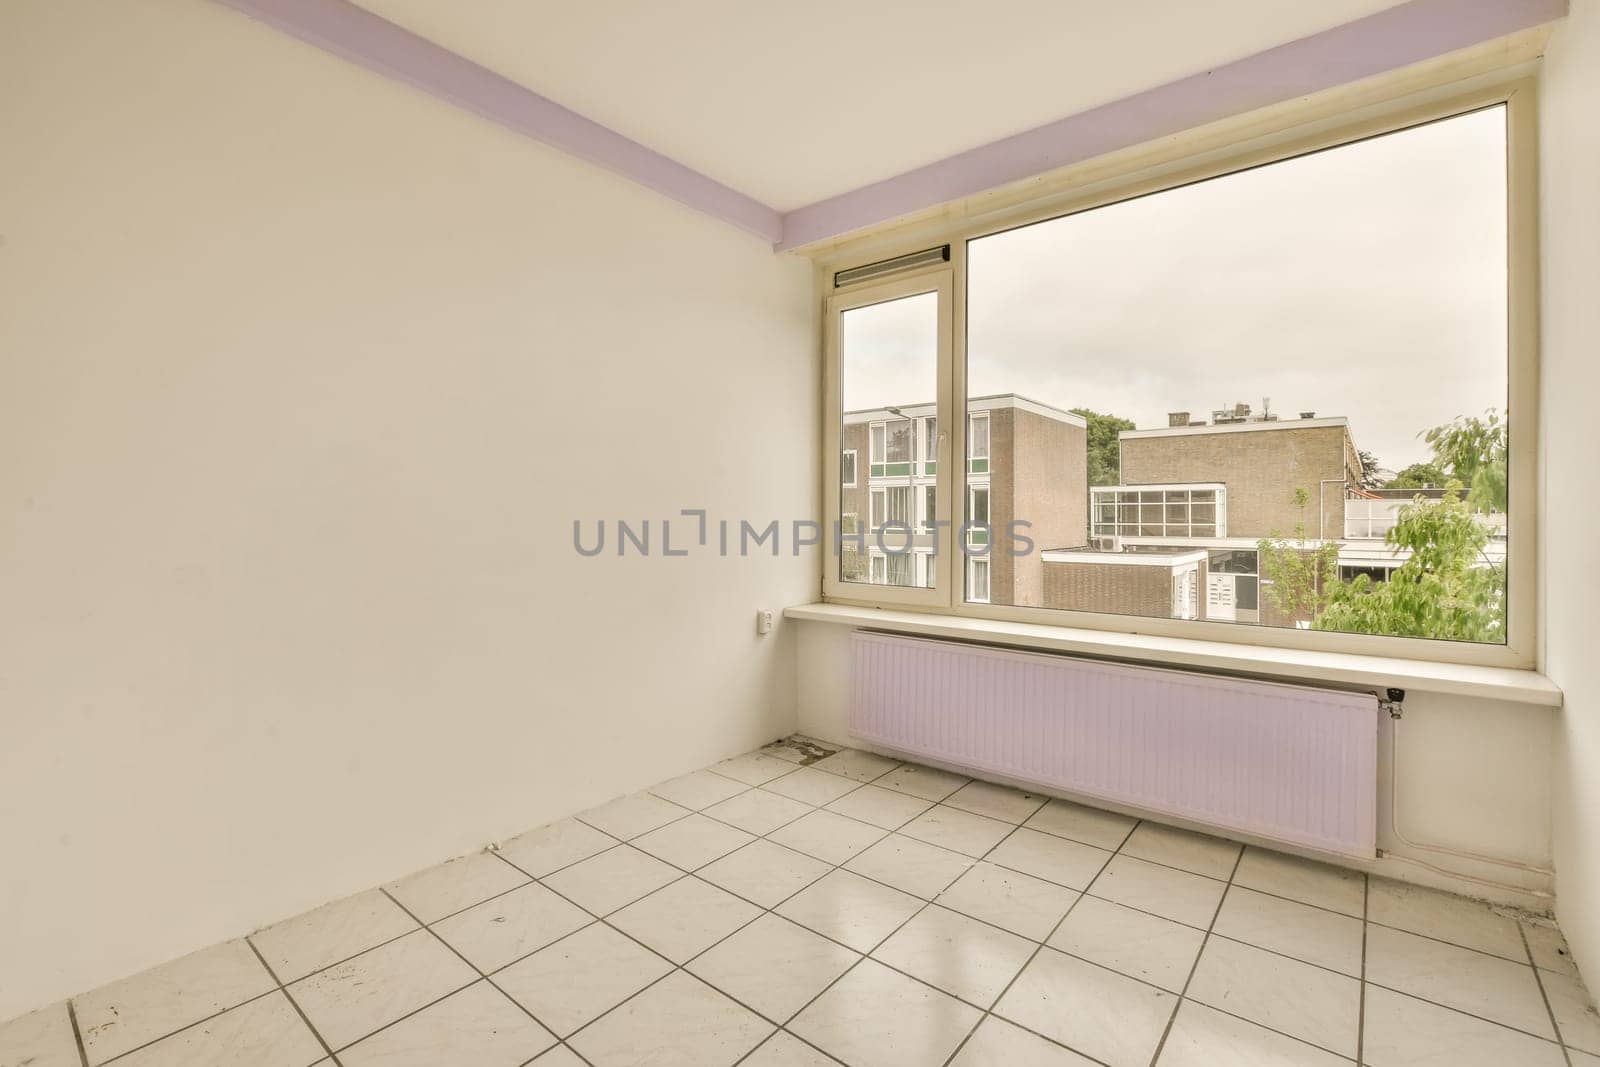 an empty room with white tiles and purple trim around the window panes, looking out onto the street below